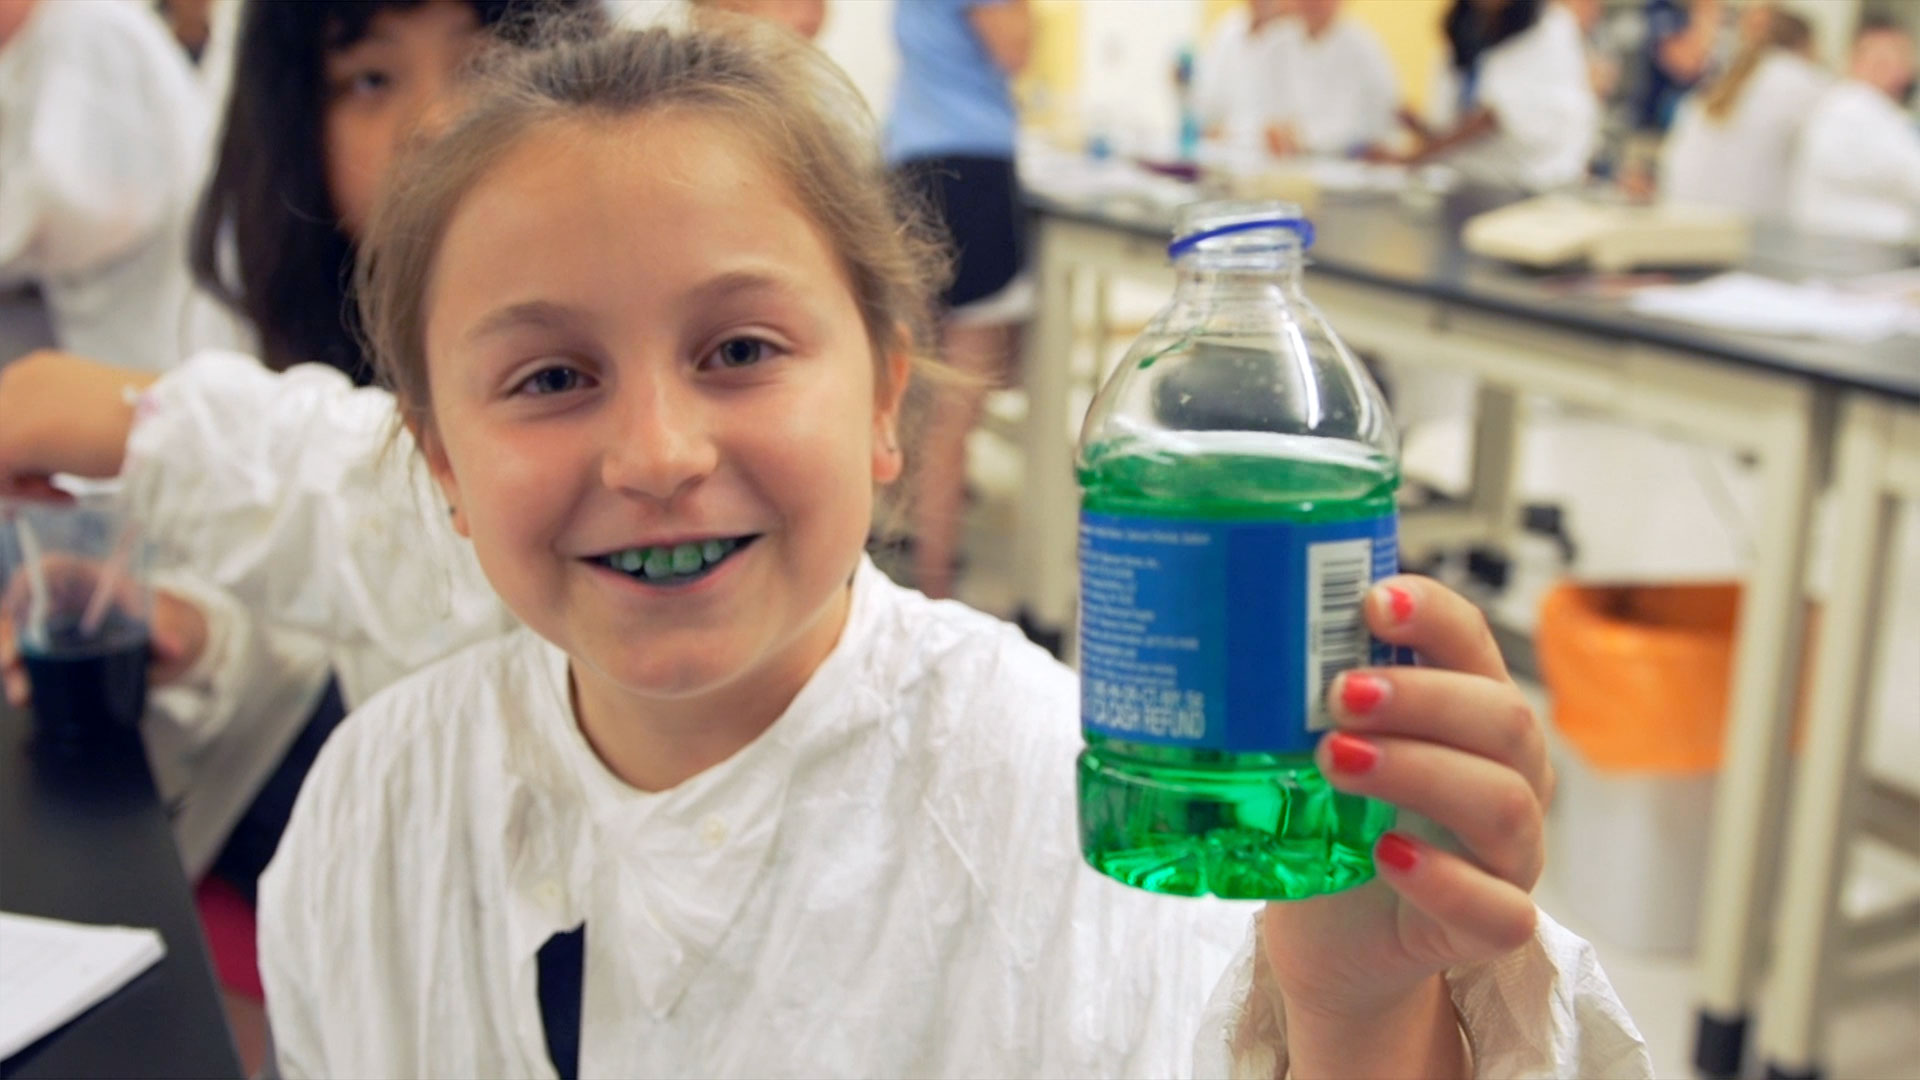 Young girl shows water bottle dyed green from the food coloring in her mouth